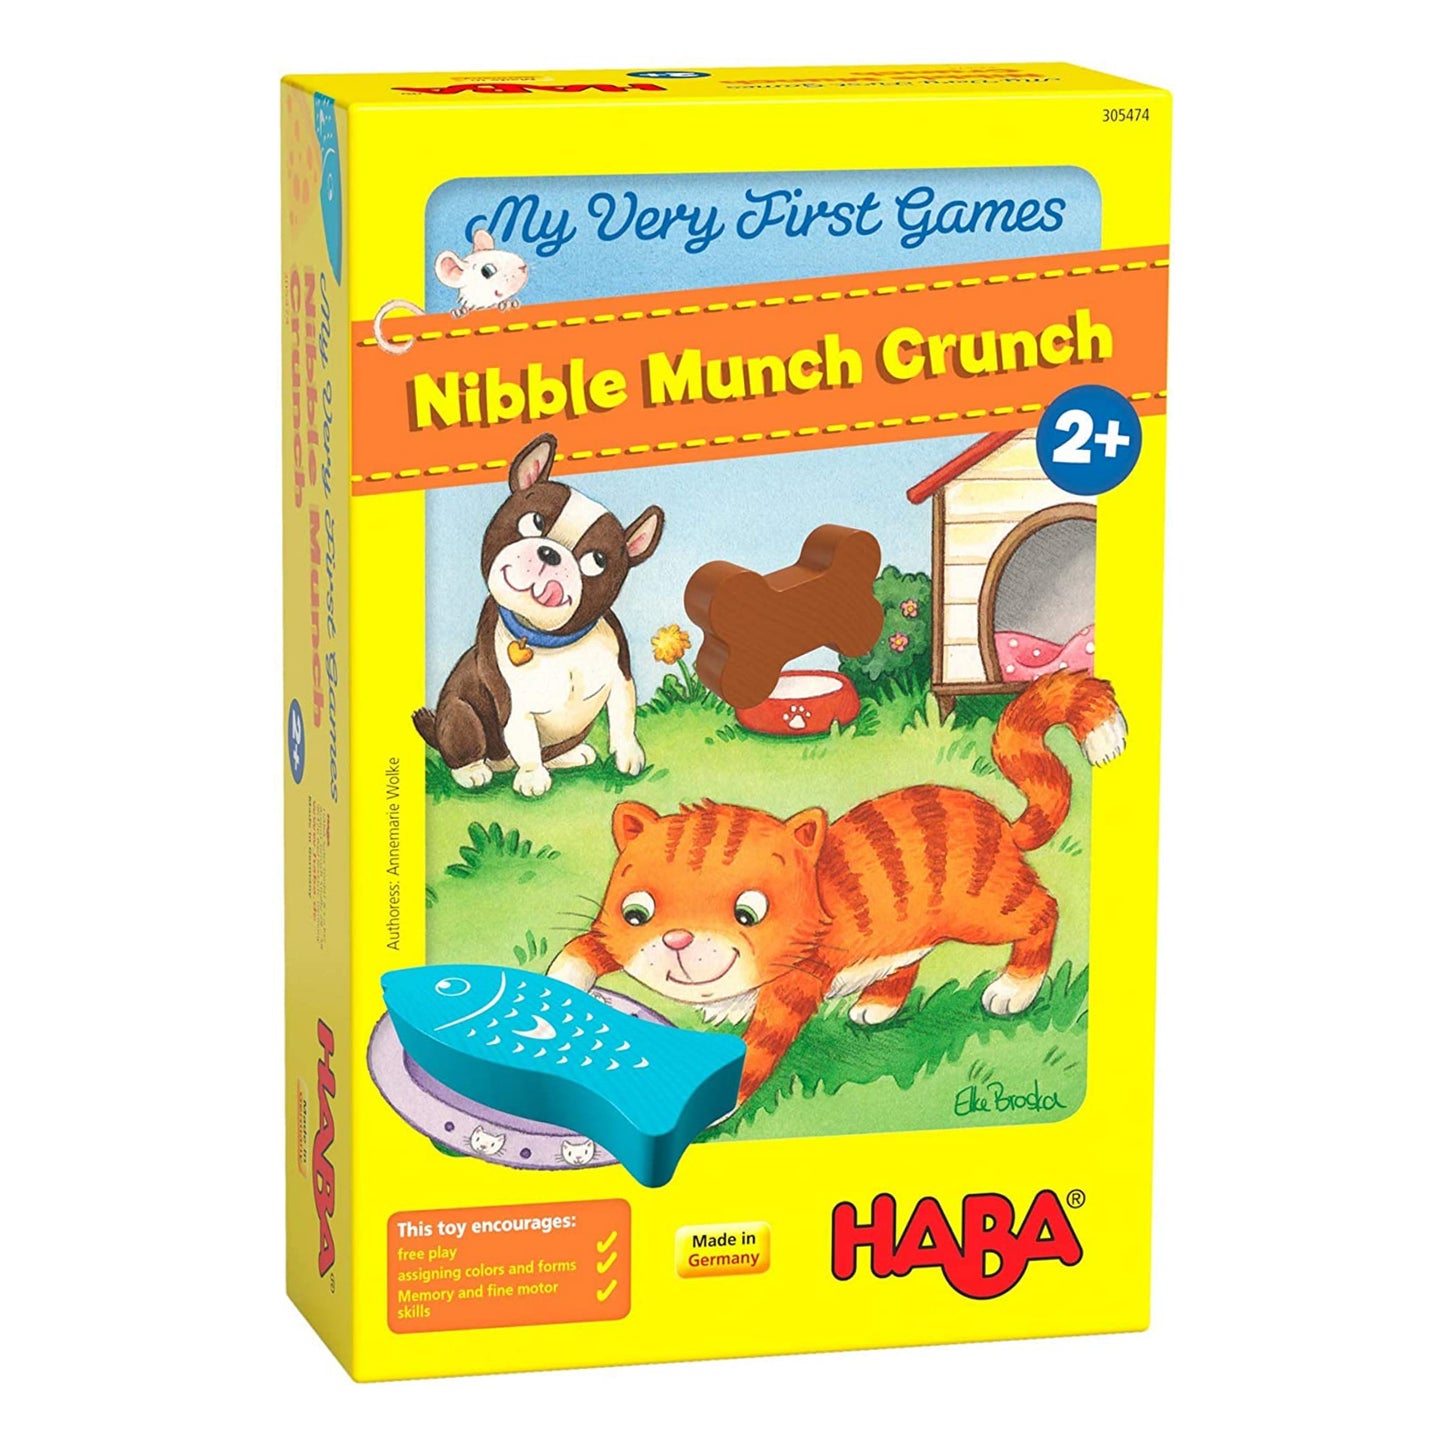 My Very First Game: Nibble Munch Crunch